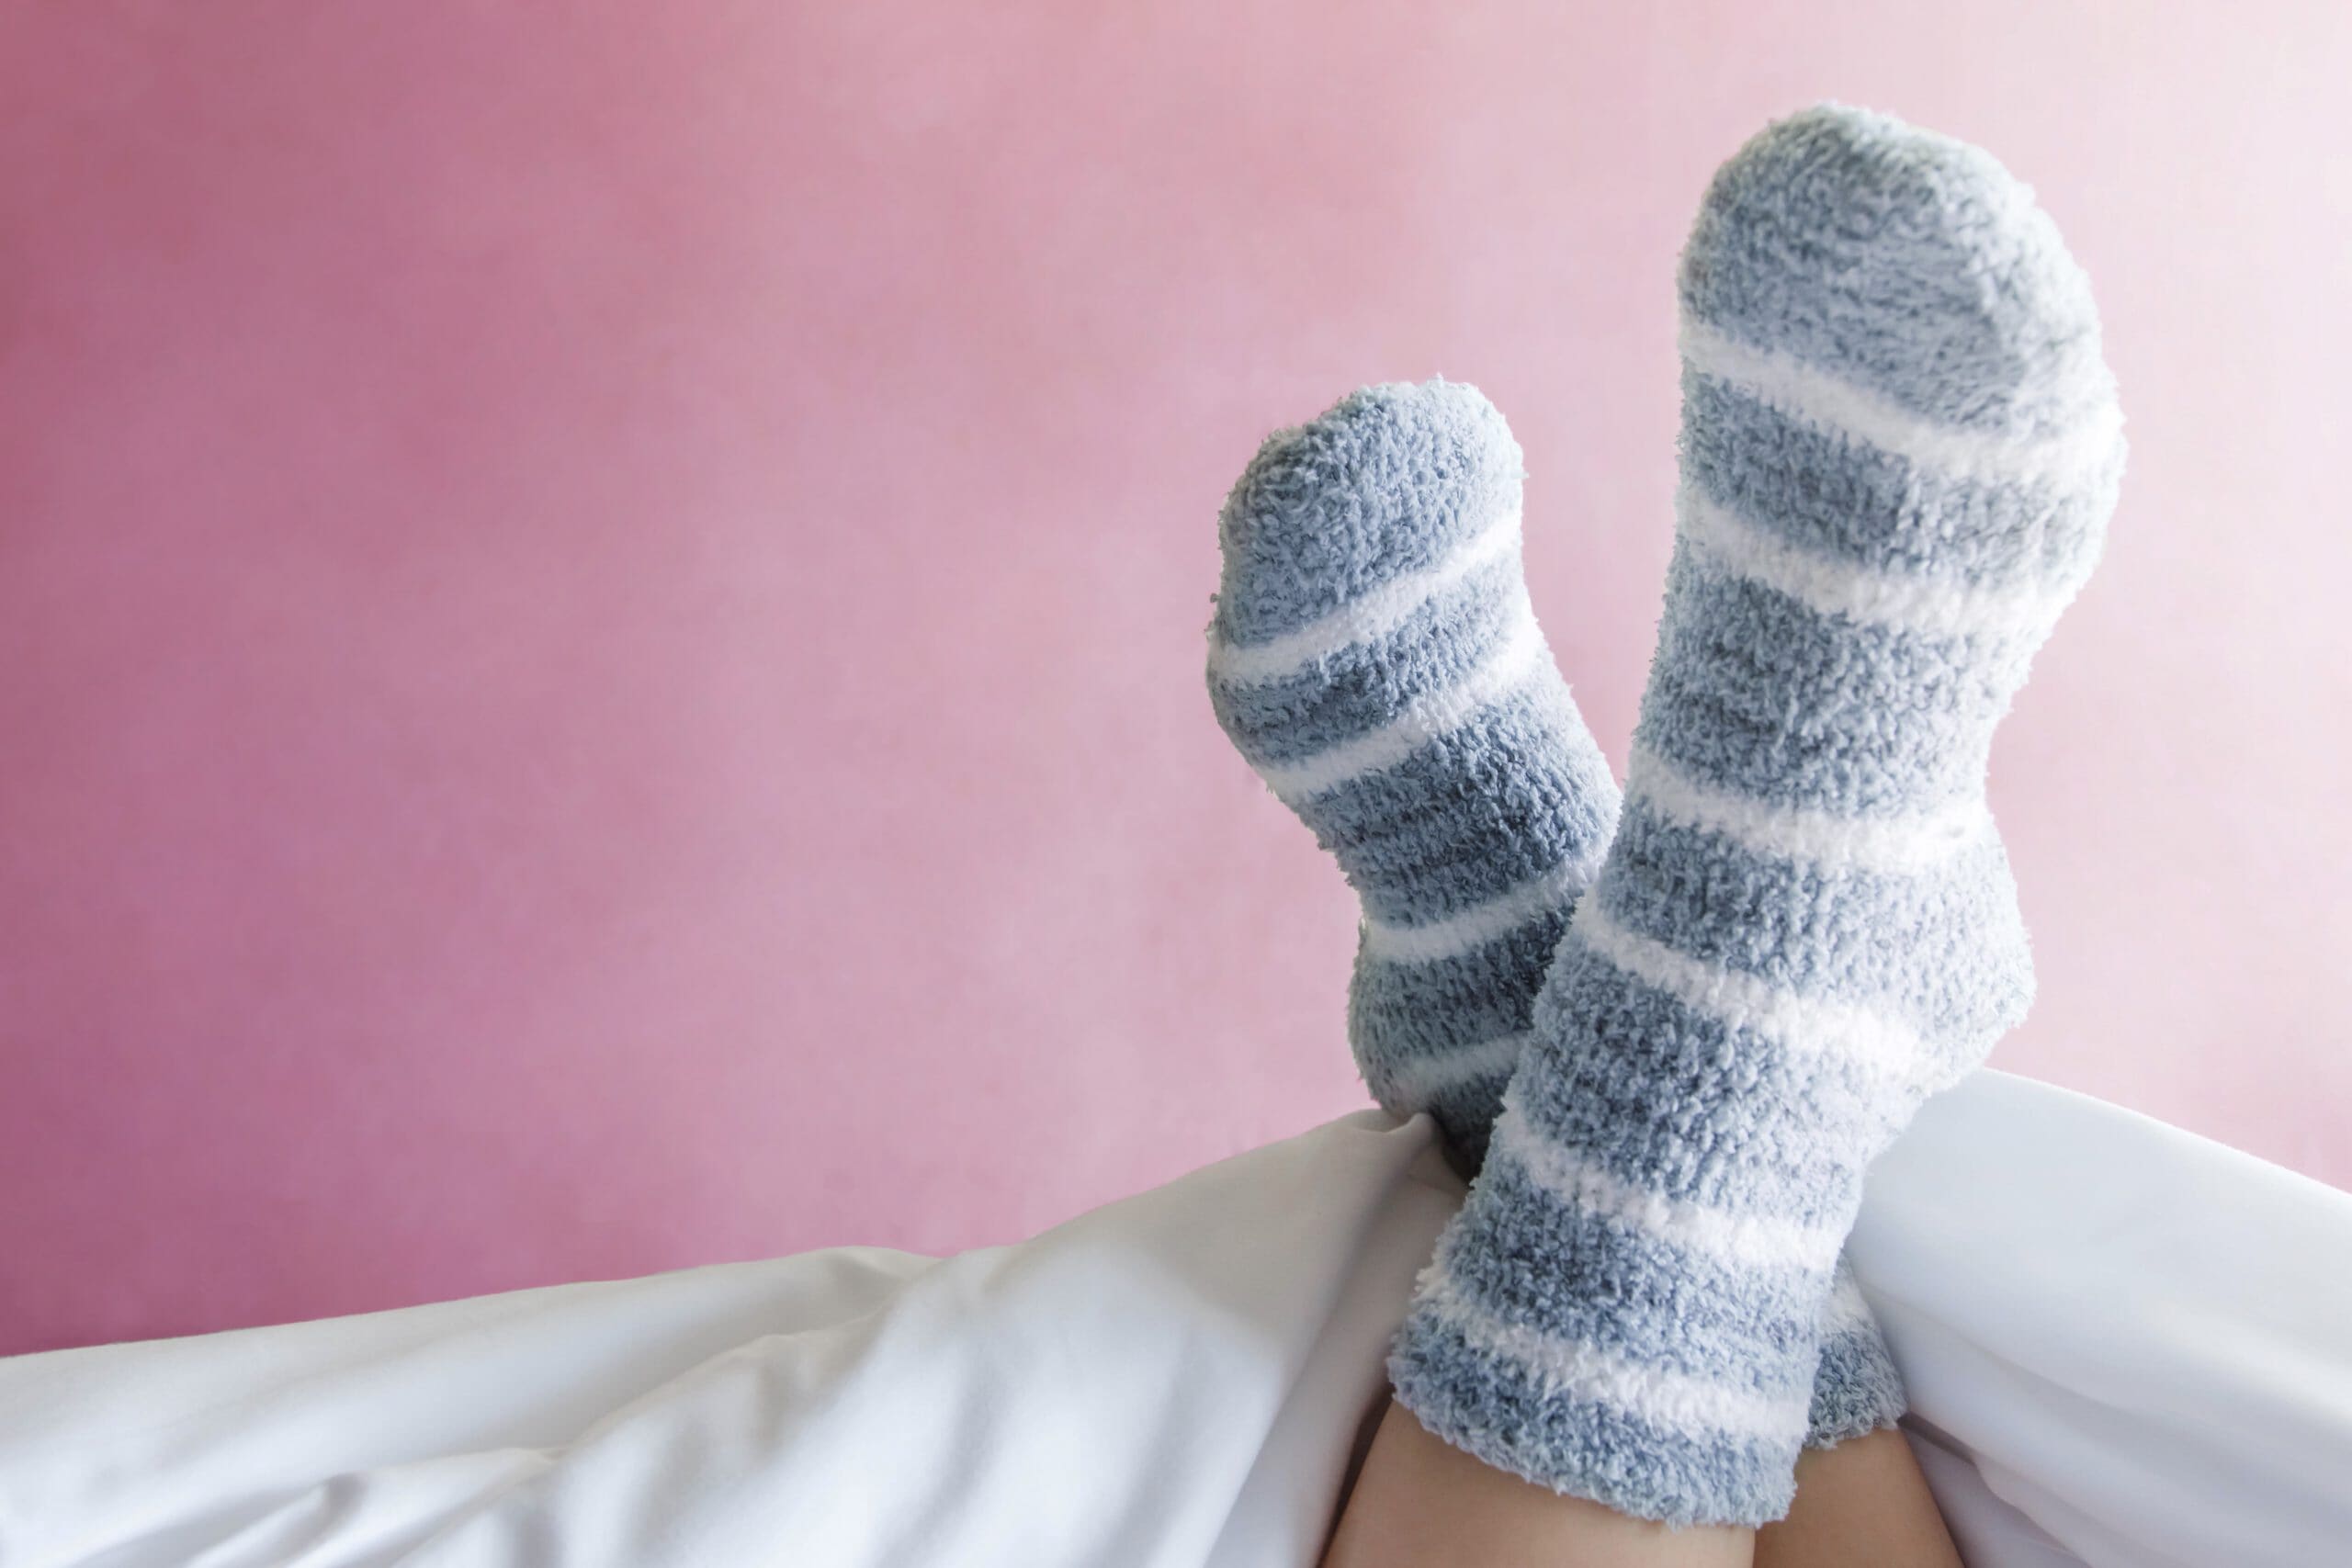 Why you should always change your socks before going to bed